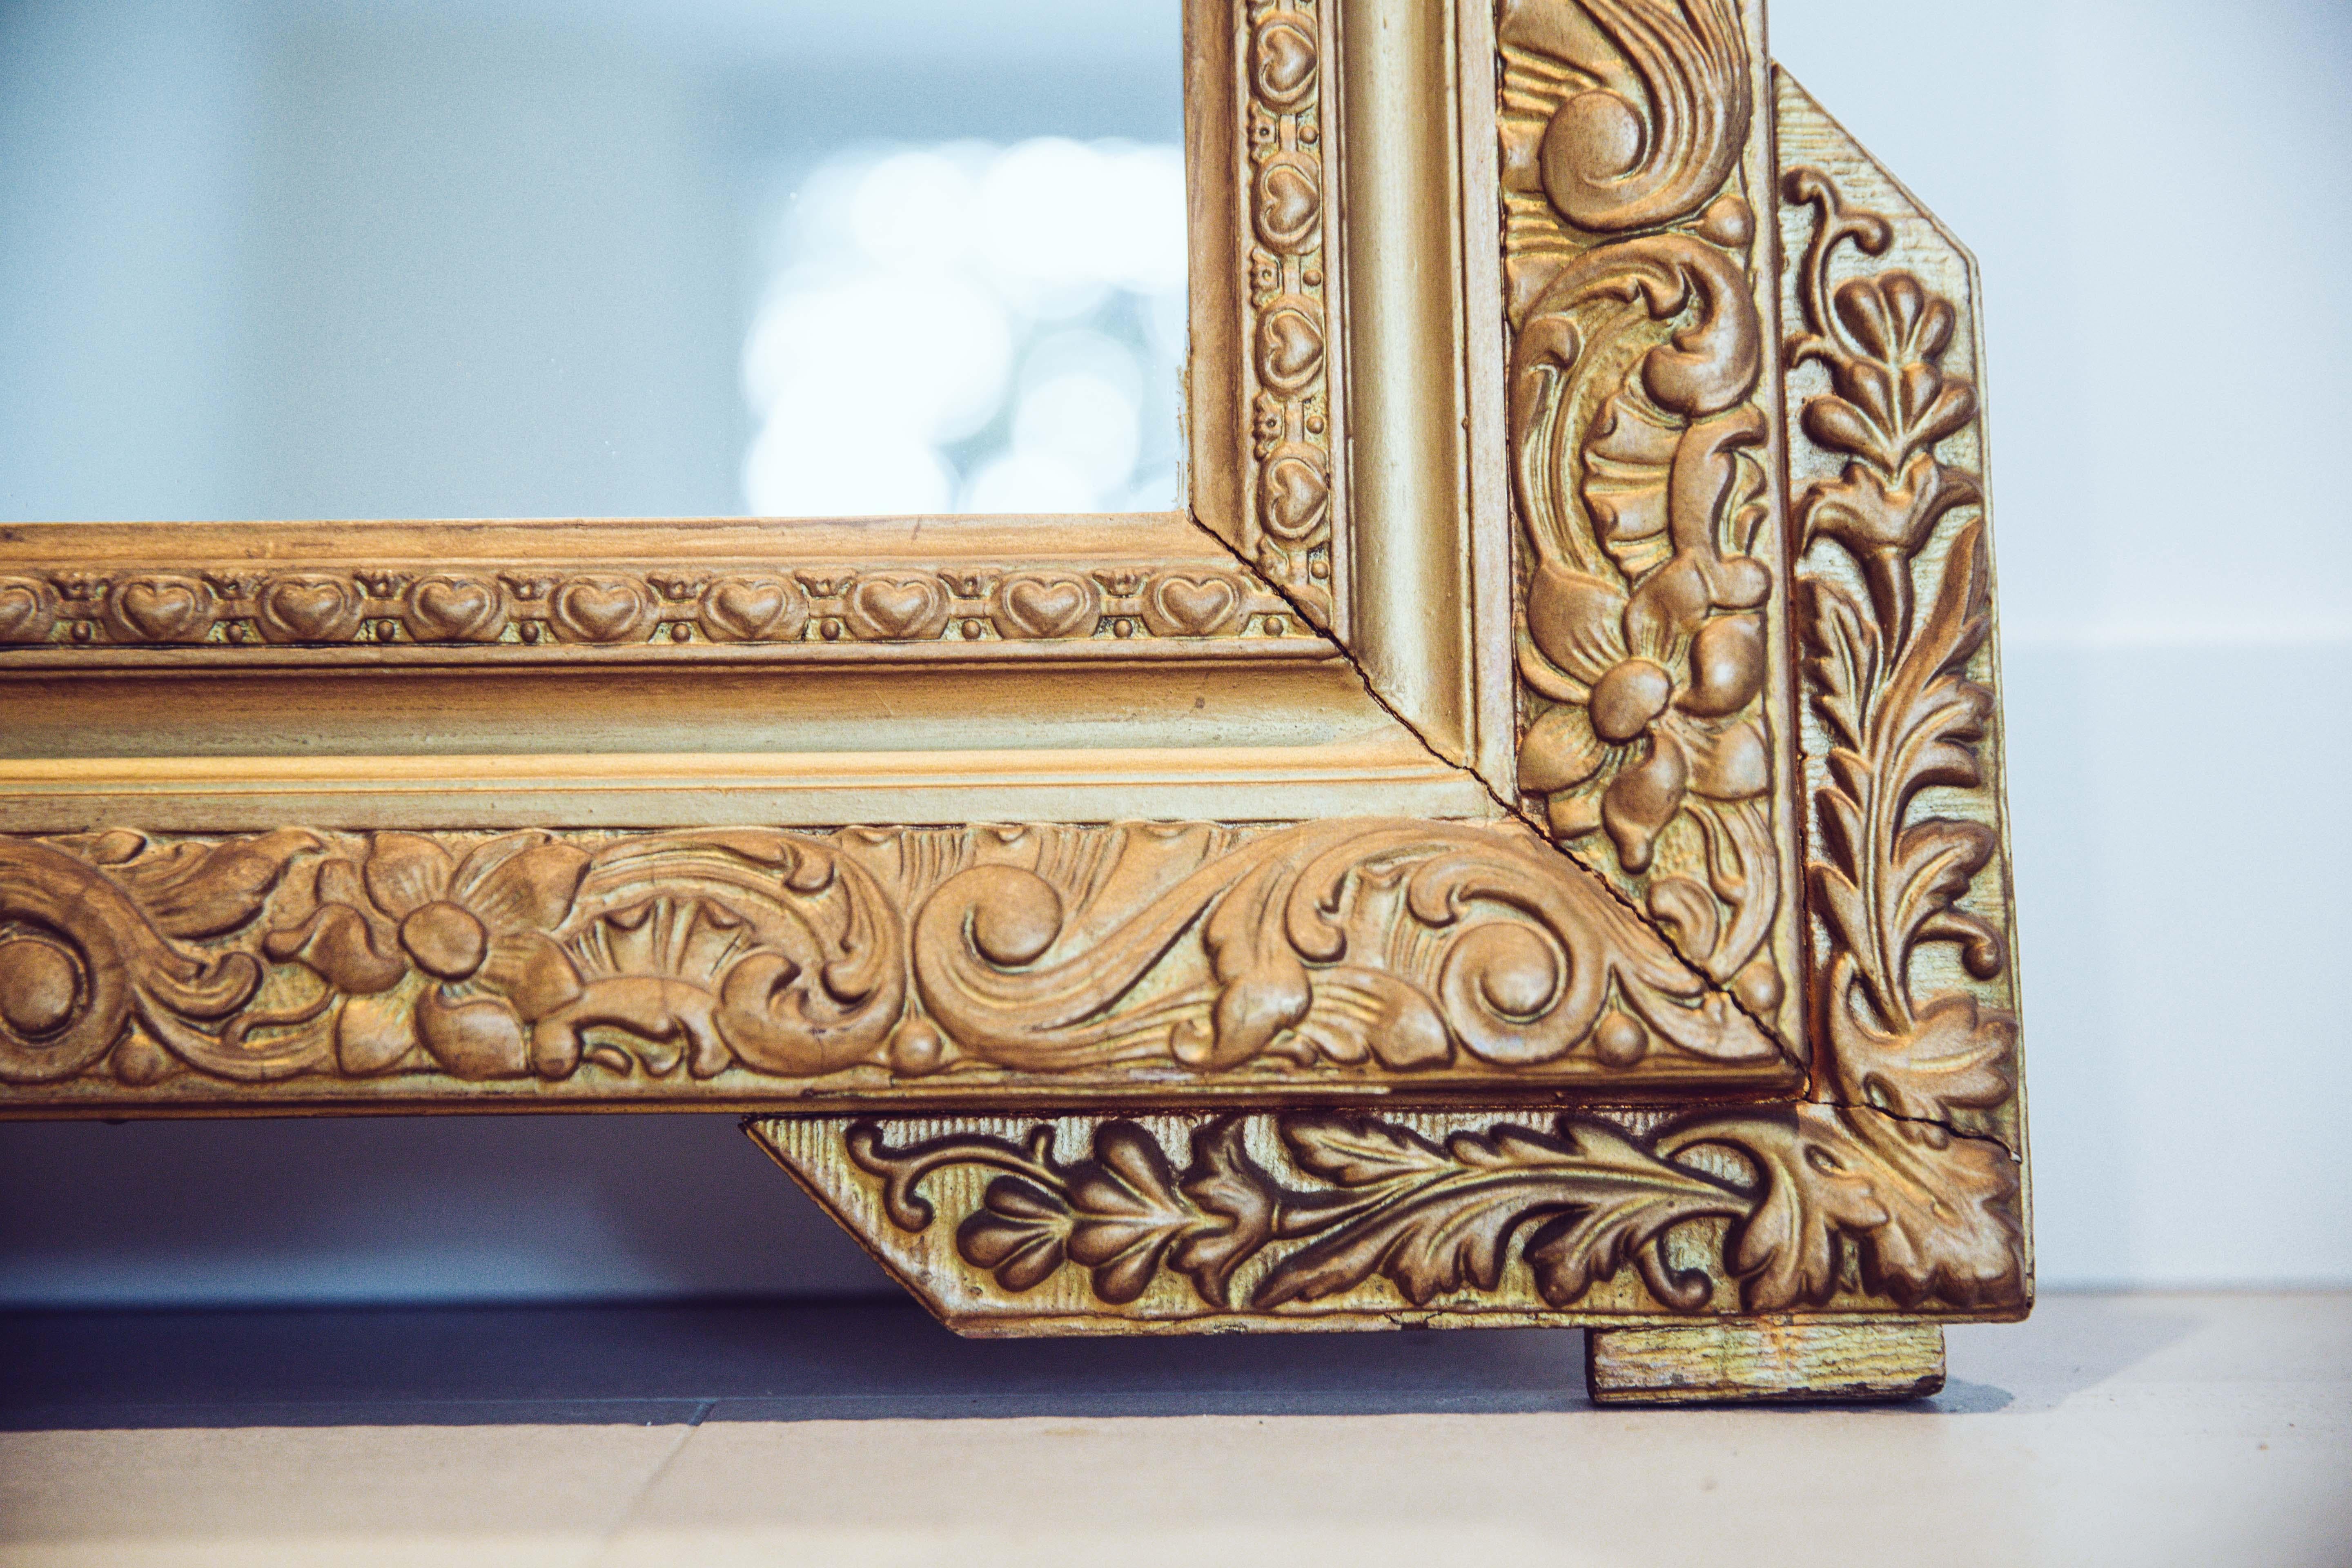 19th Century French Carved Gilded Wood Mirror with Urn Motif Crest For Sale 5